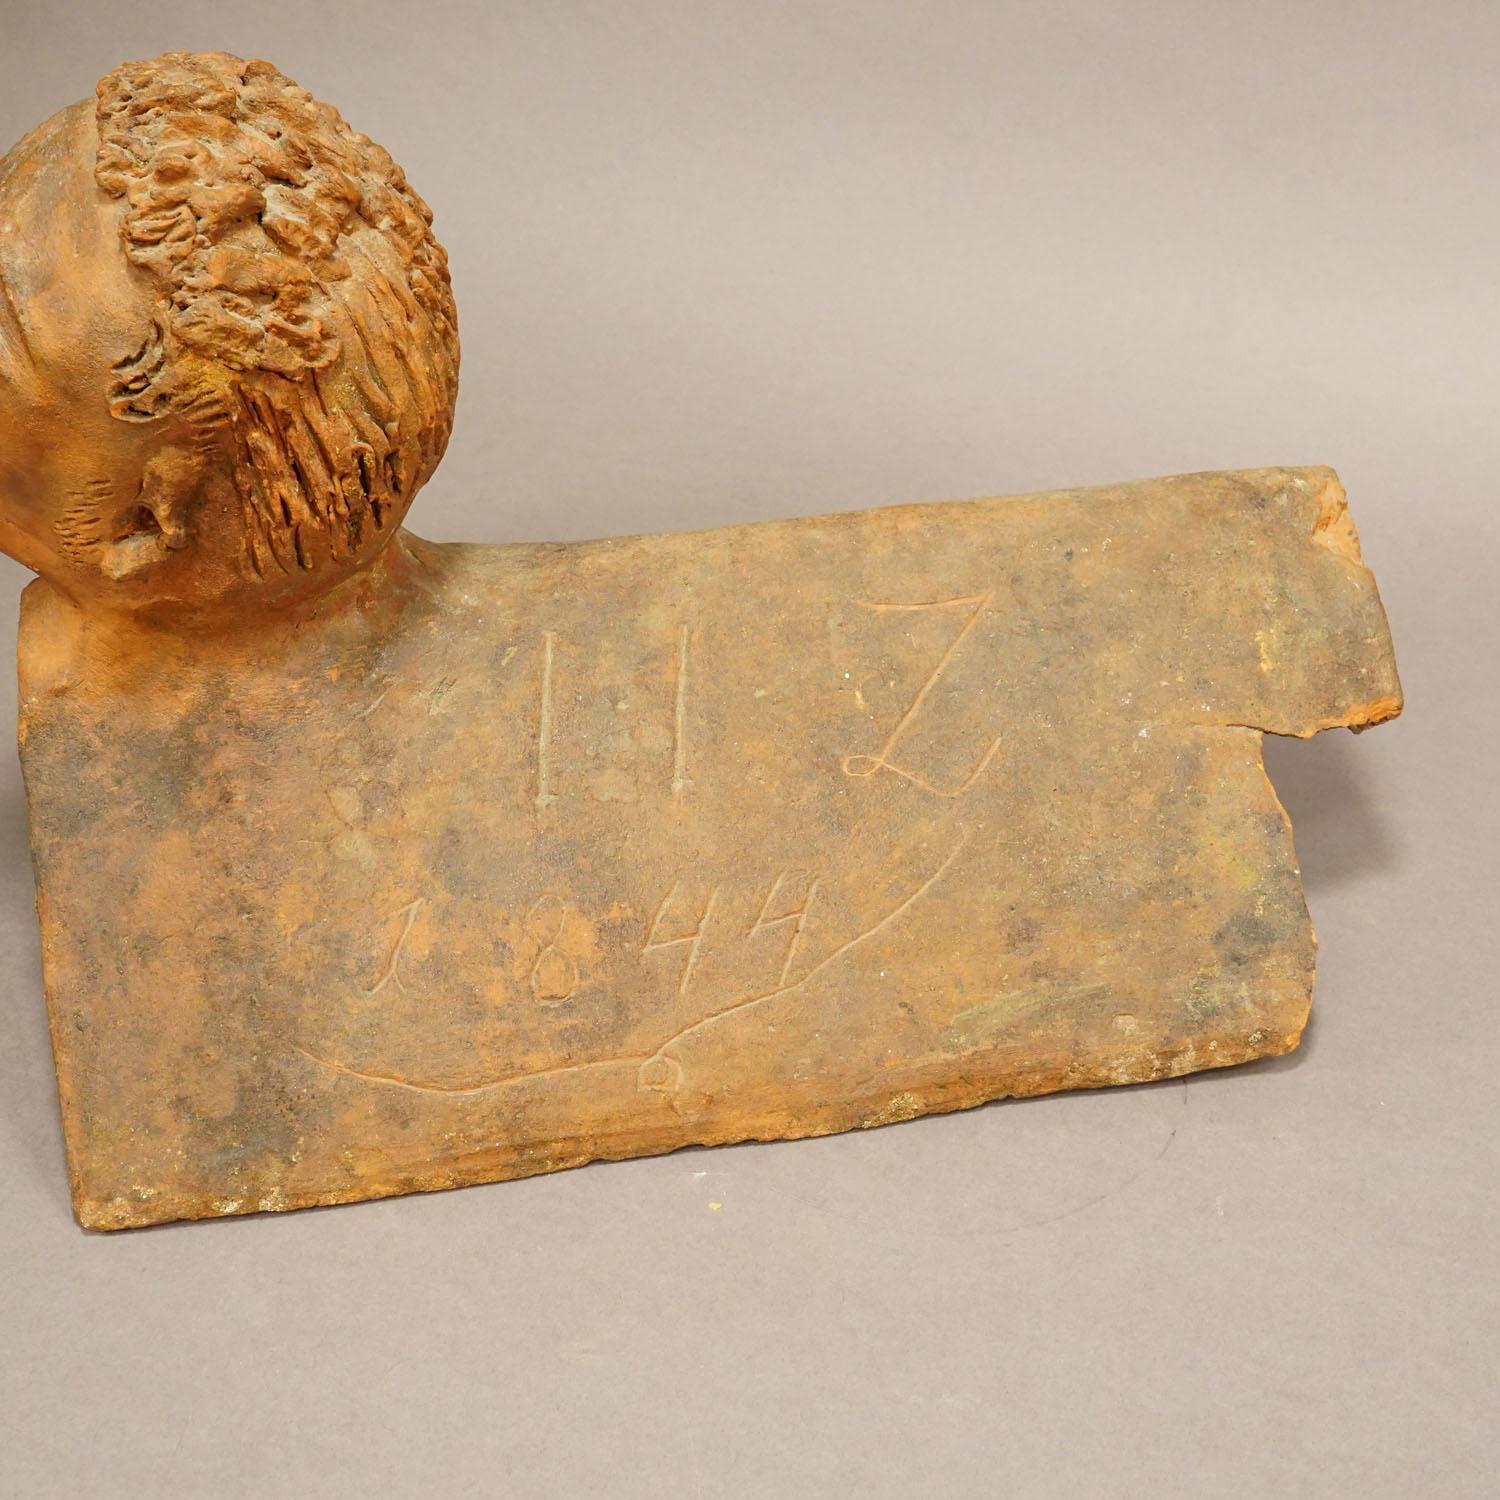 19th Century Antique Handmade Roof Rider Brick, Germany 1844 For Sale